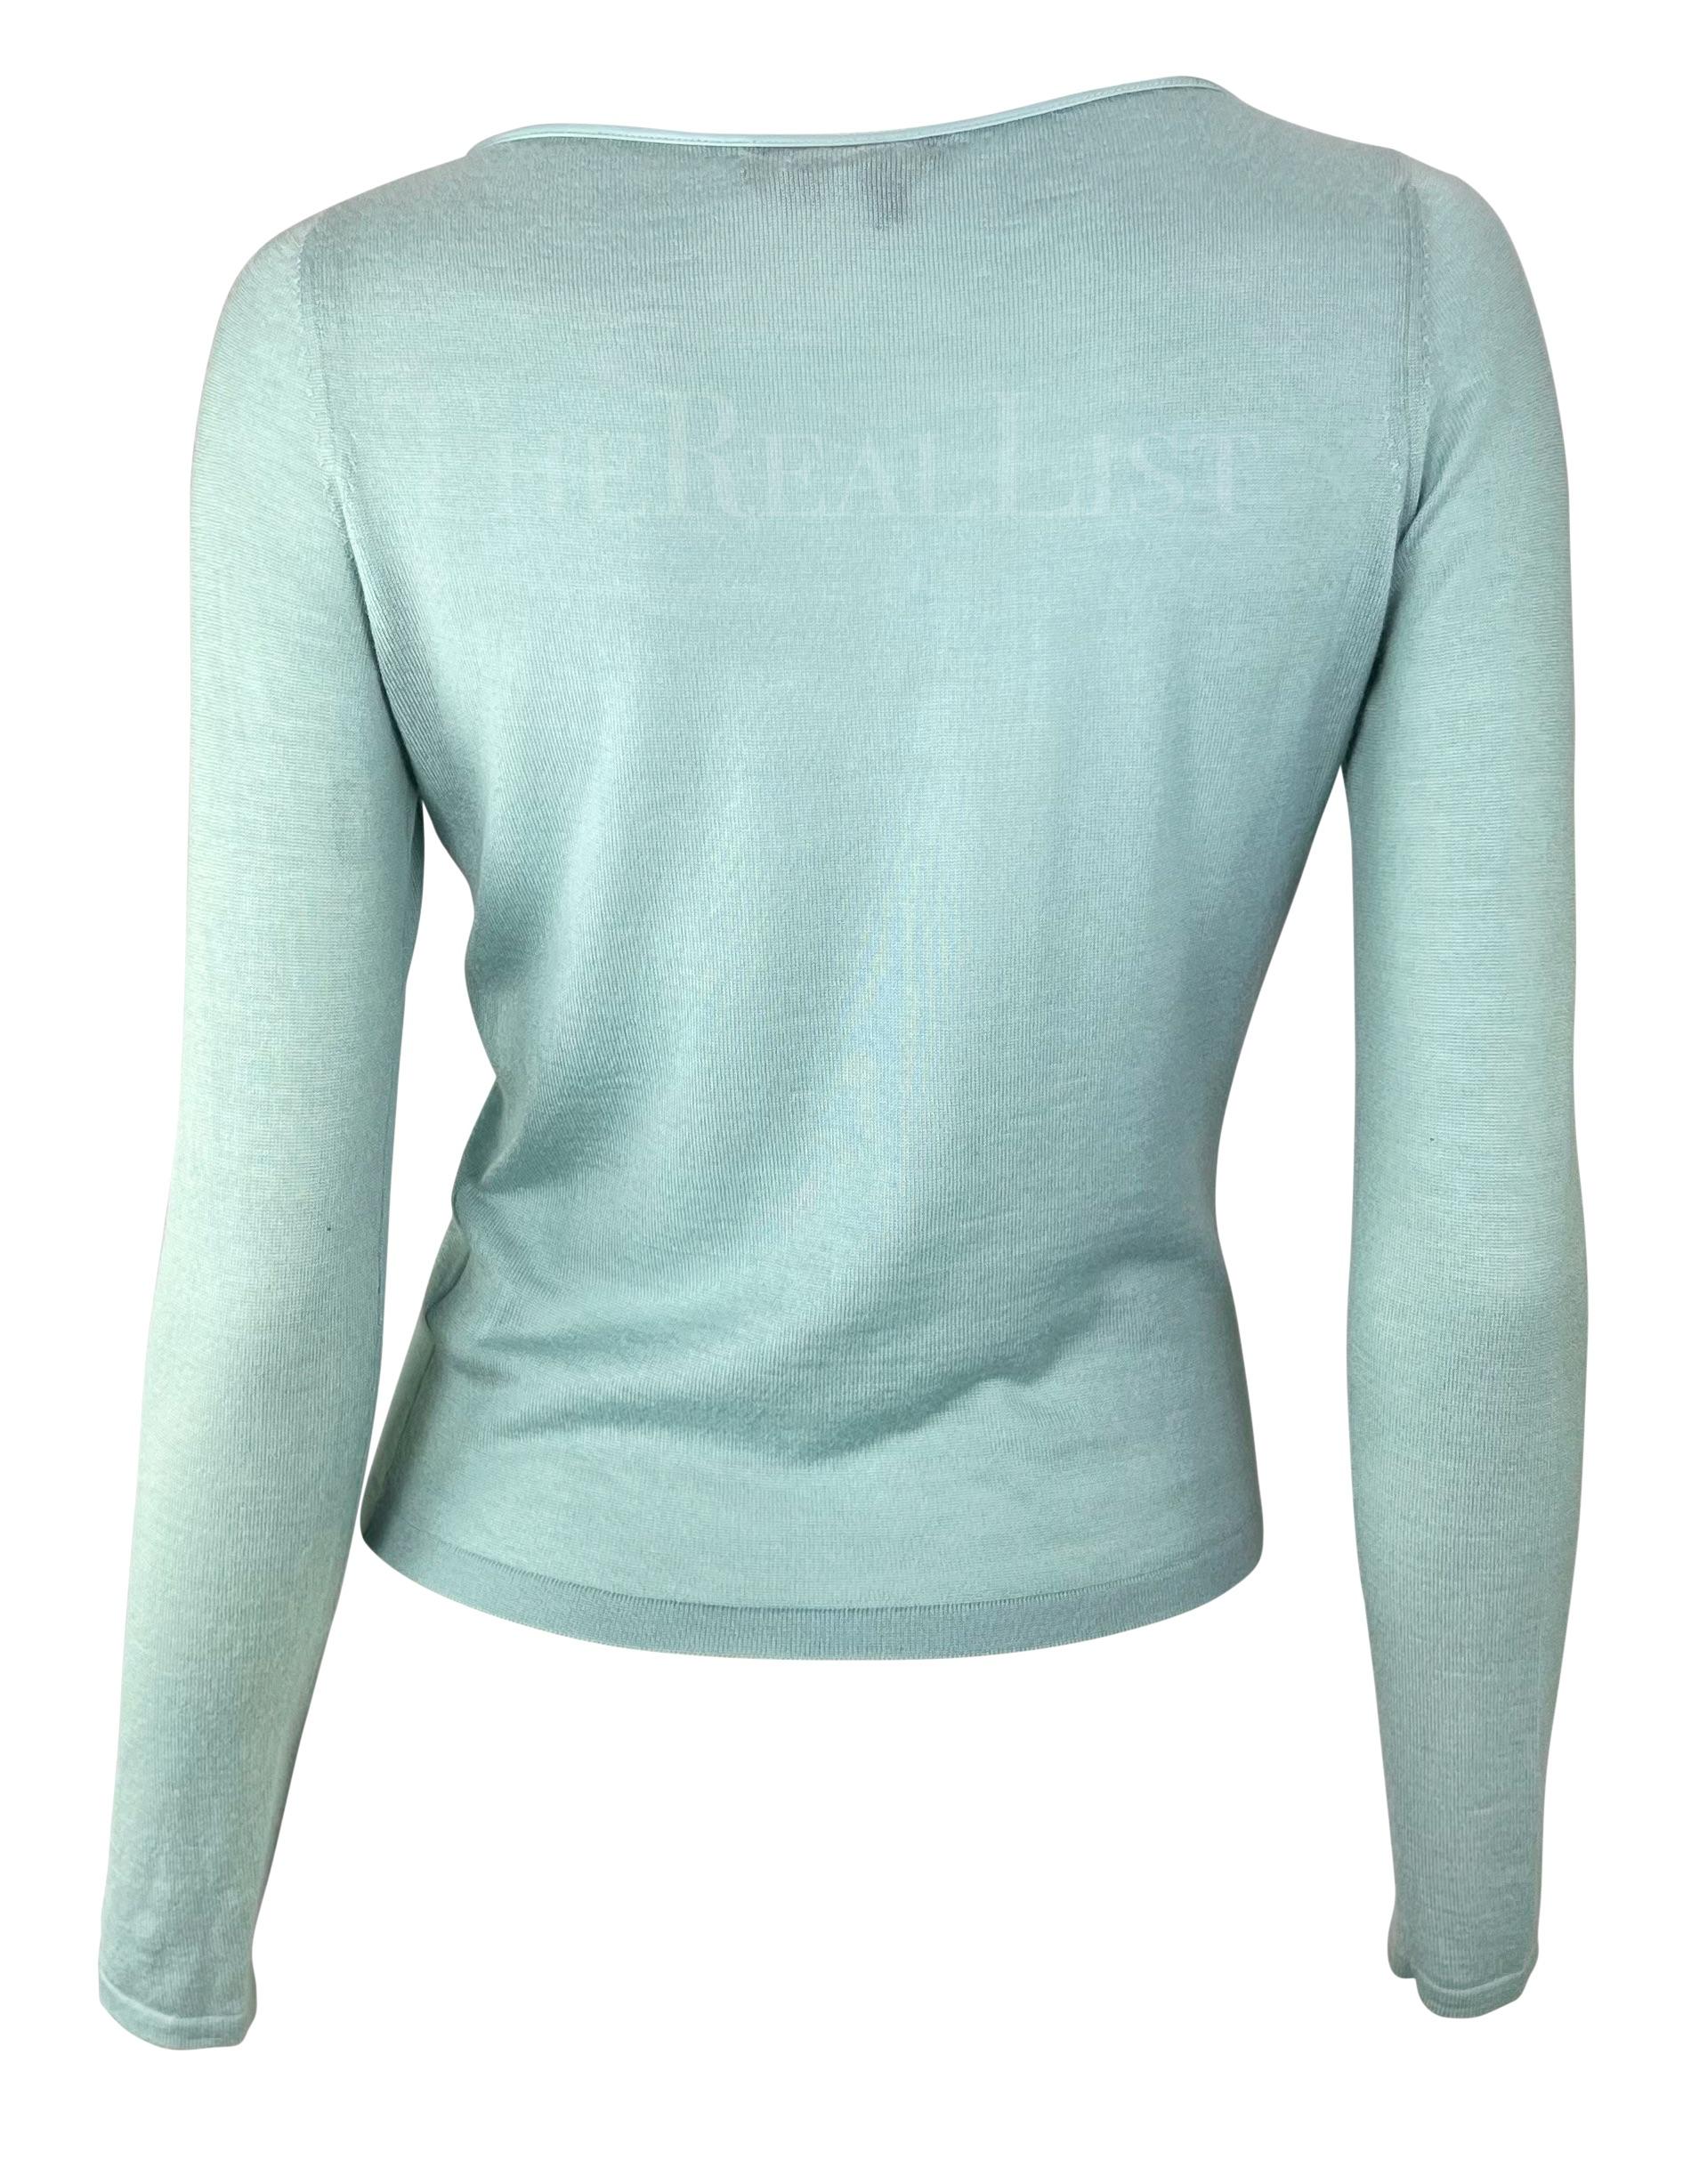 Women's or Men's S/S 2000 Gucci by Tom Ford Baby Blue Knit Leather Tie Plunging Top For Sale